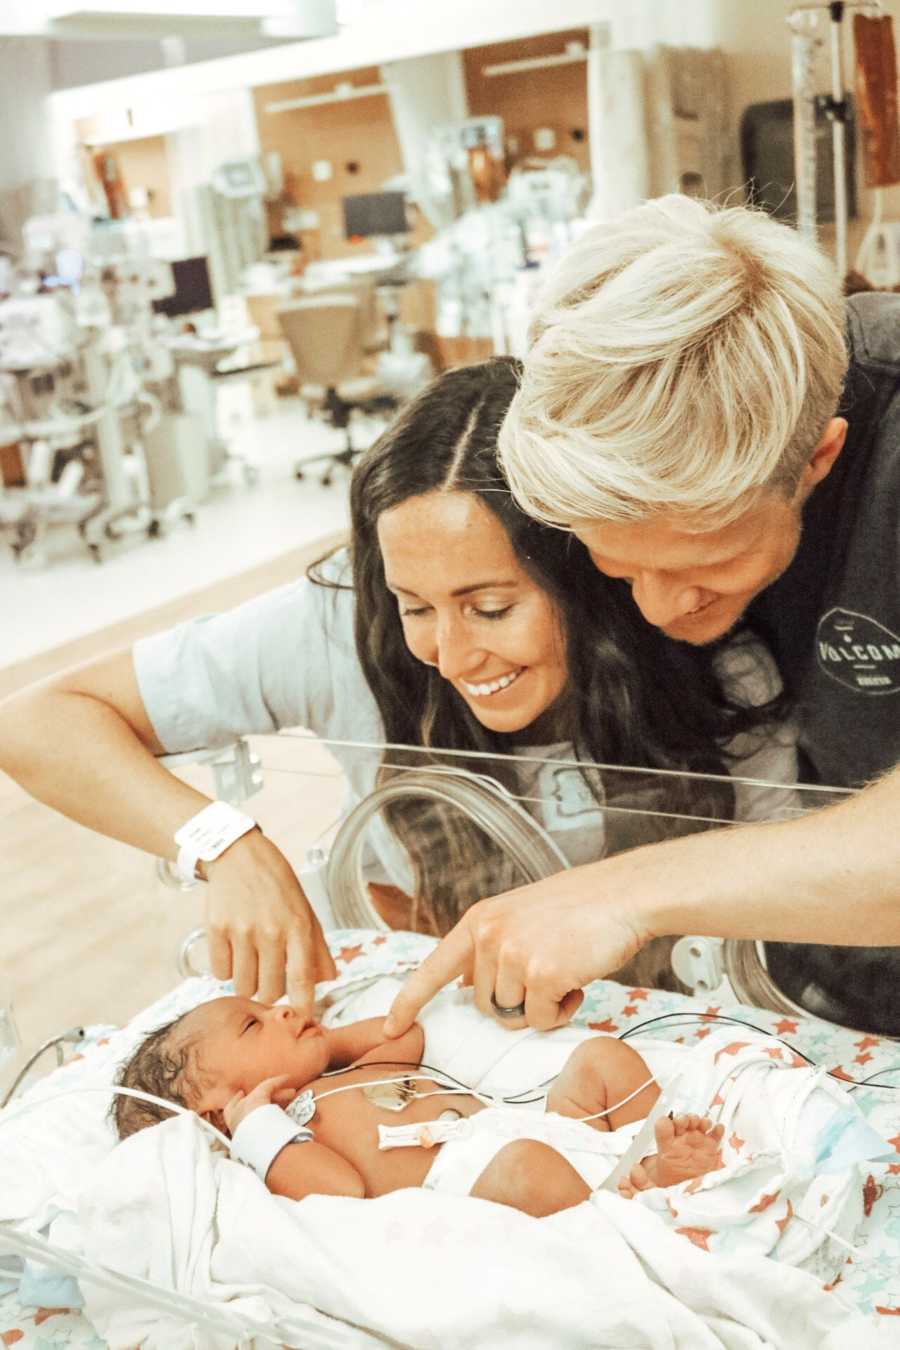 Husband and wife stands smiling over newborn they are adopting